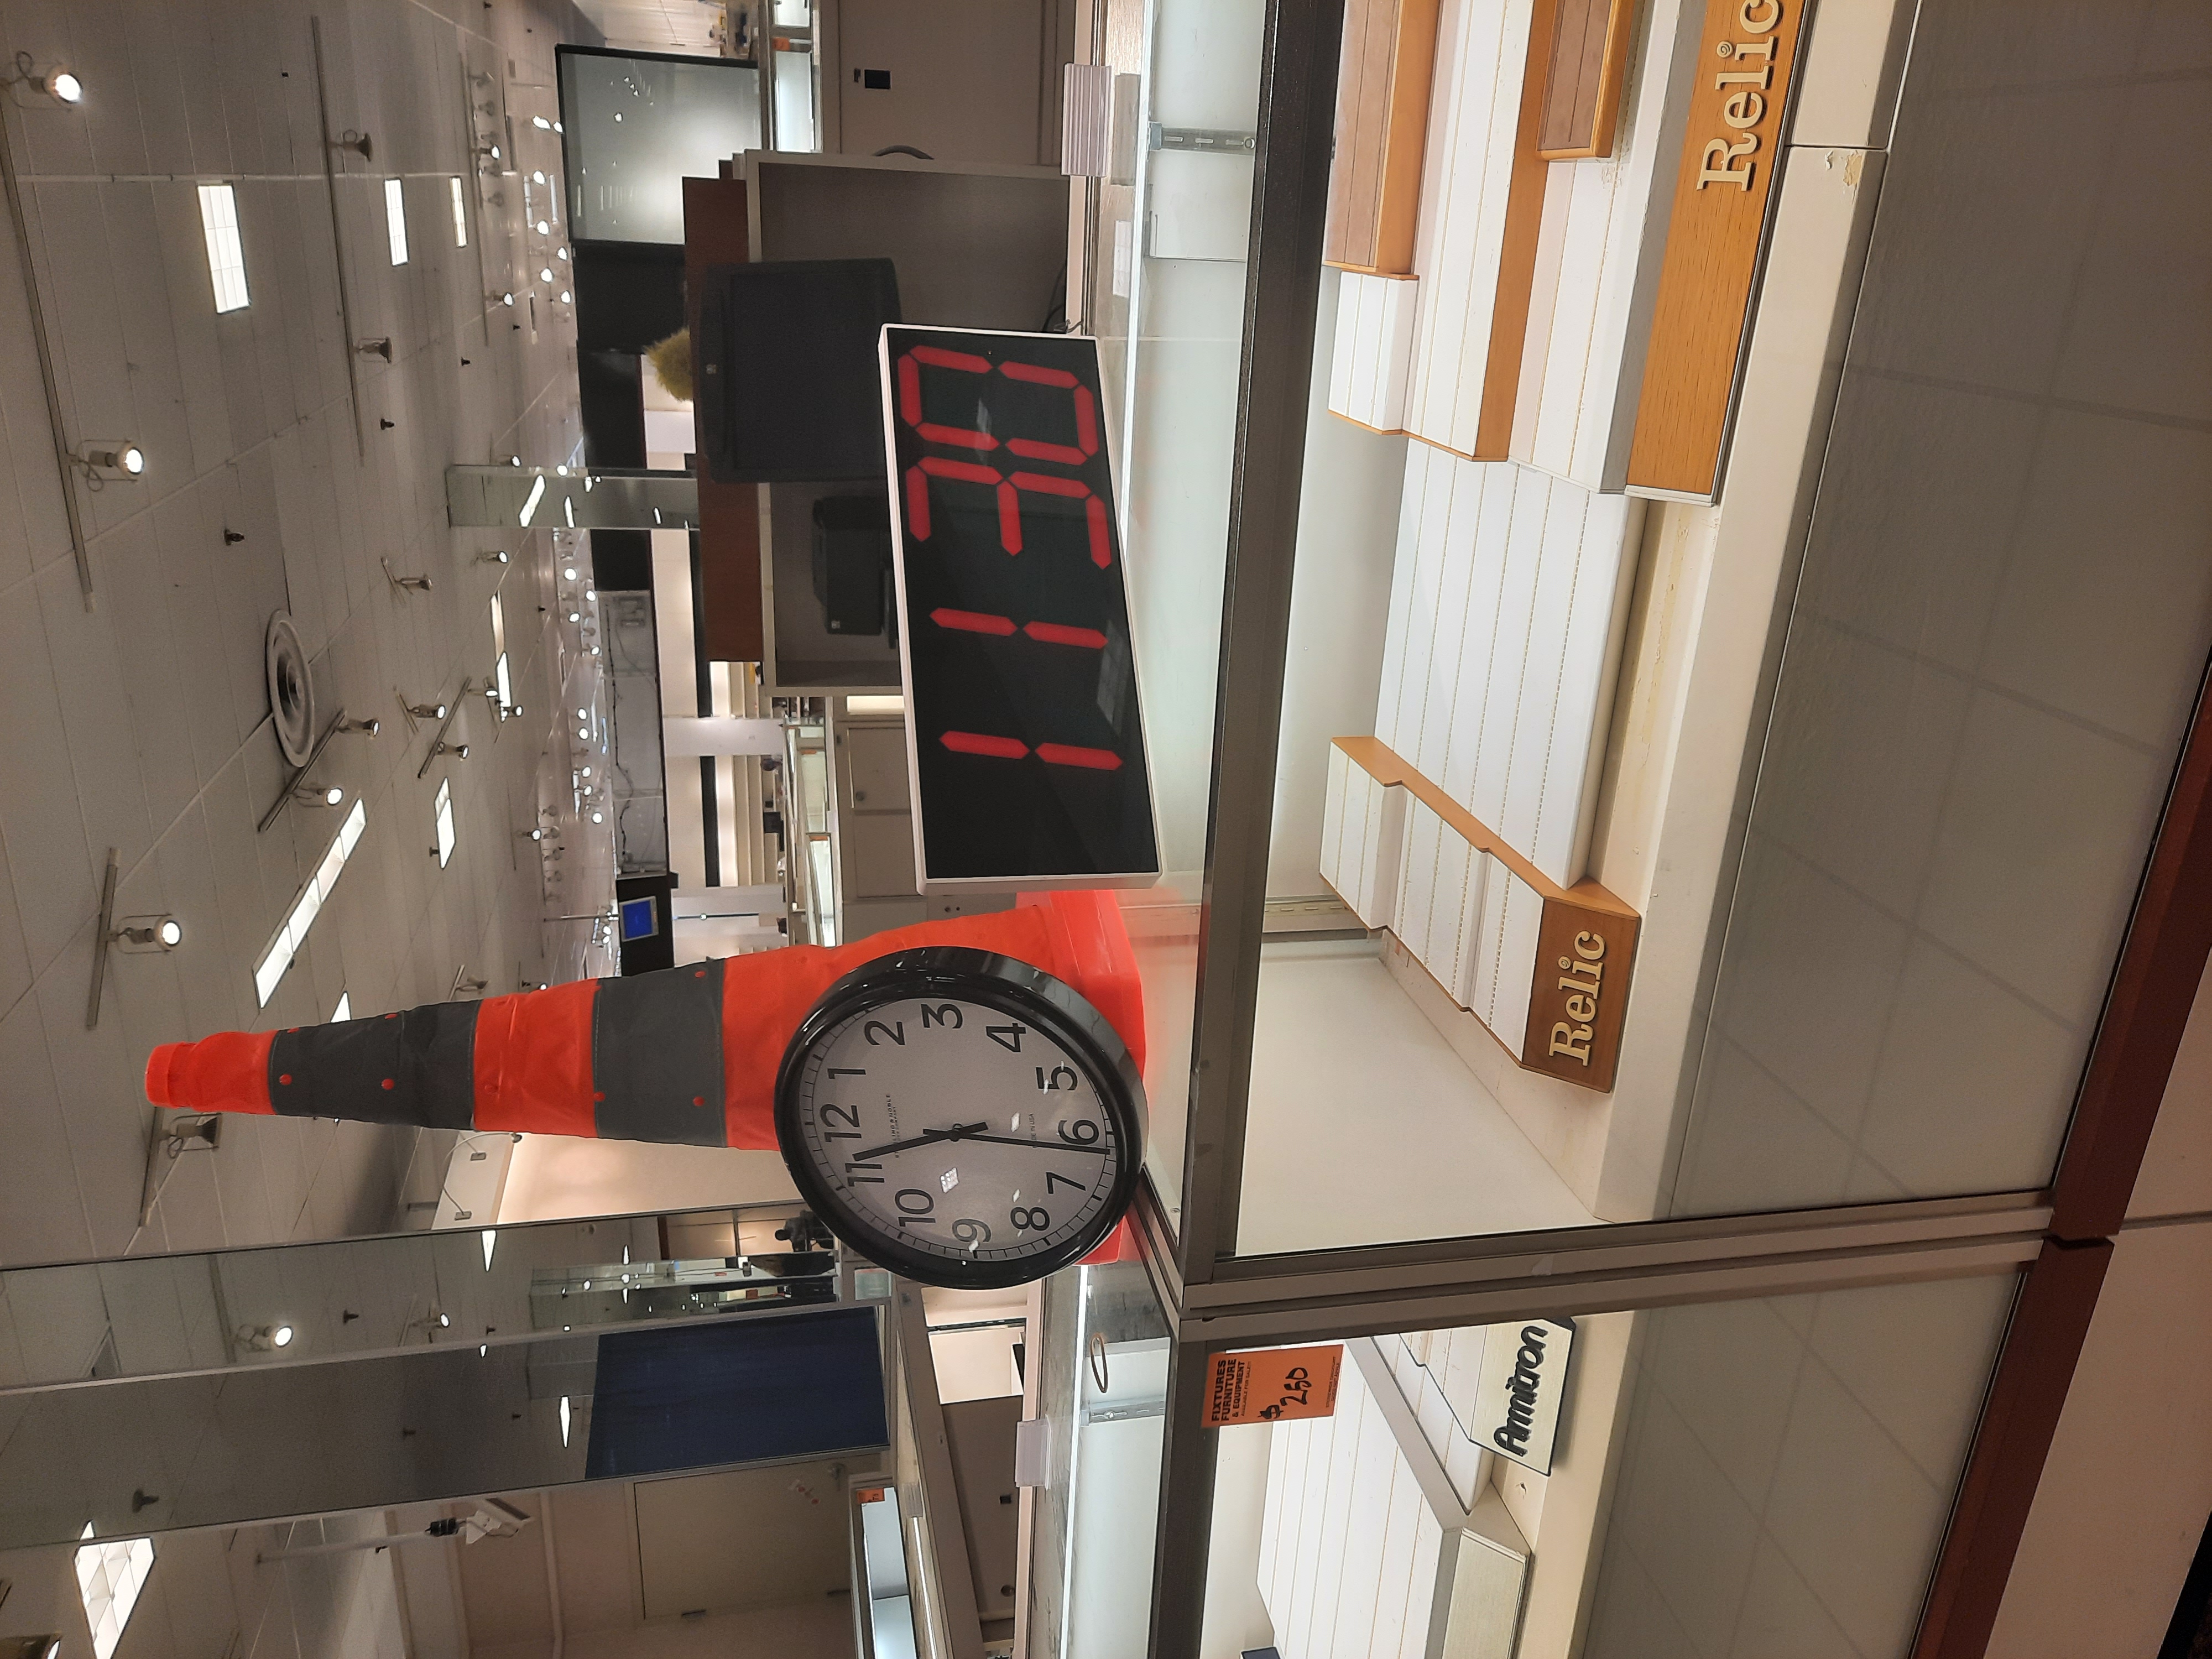 An analogue clock sits propped up against a bright orange traffic cone, and a digital clock sits next to it. Both clocks display the time 11:30